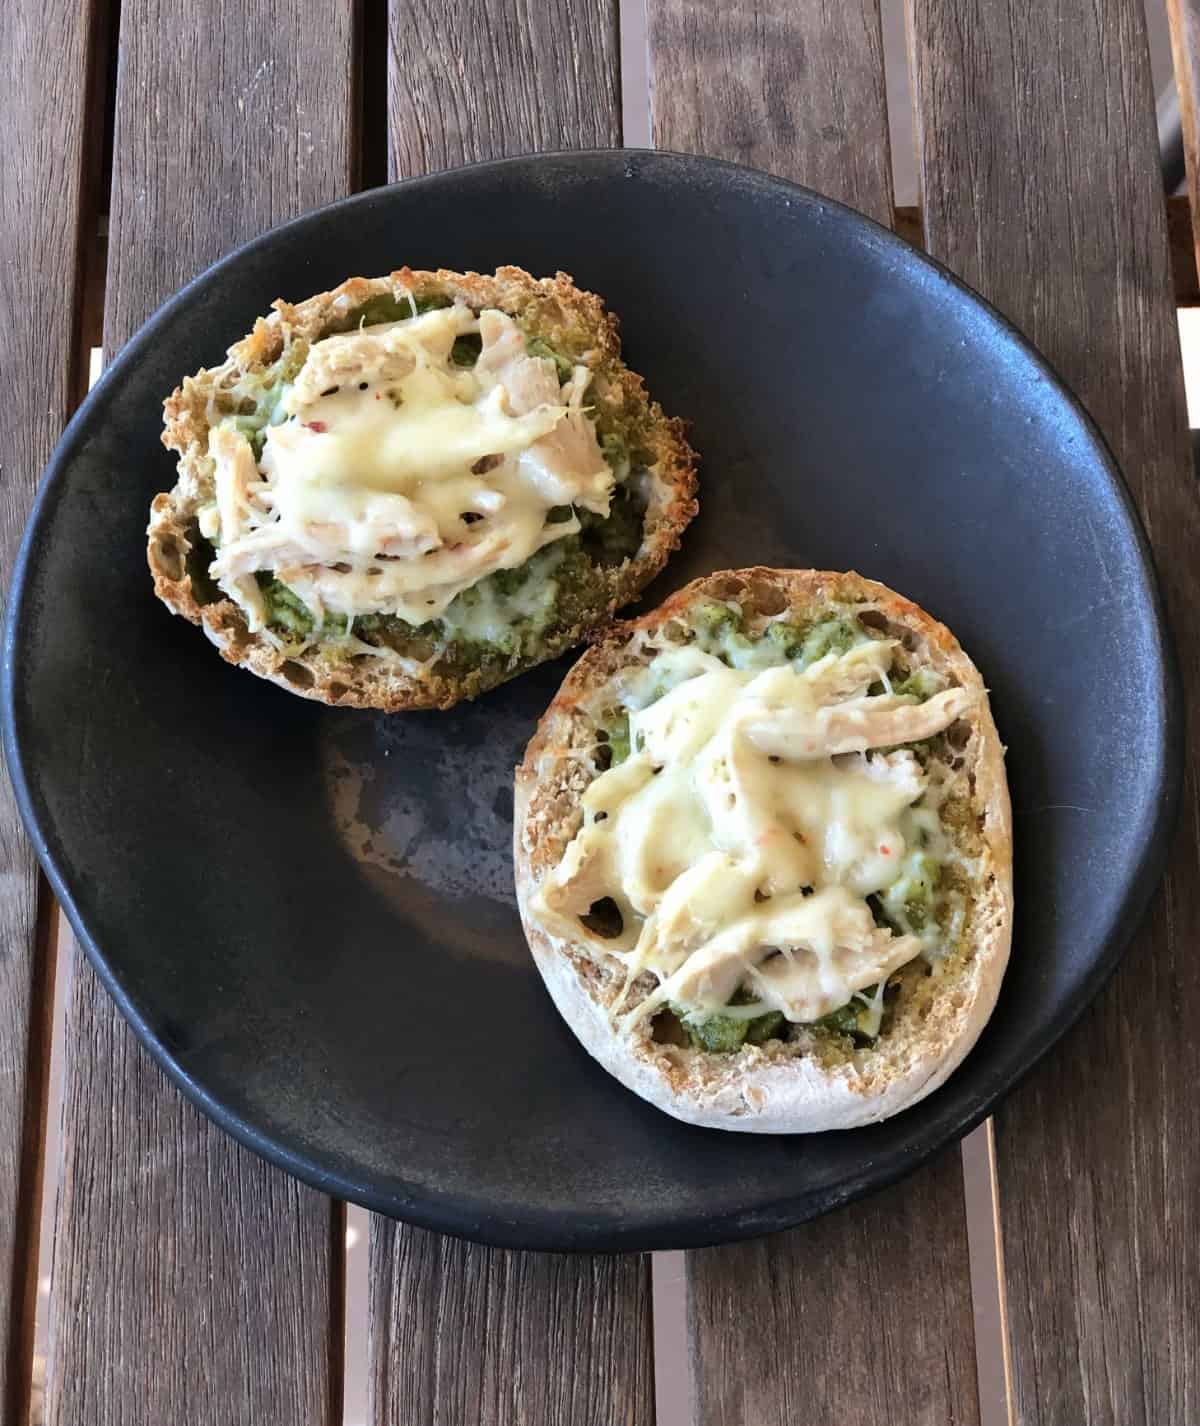 English muffin spicy chicken pesto pizza on brown ceramic plate on wooden table.